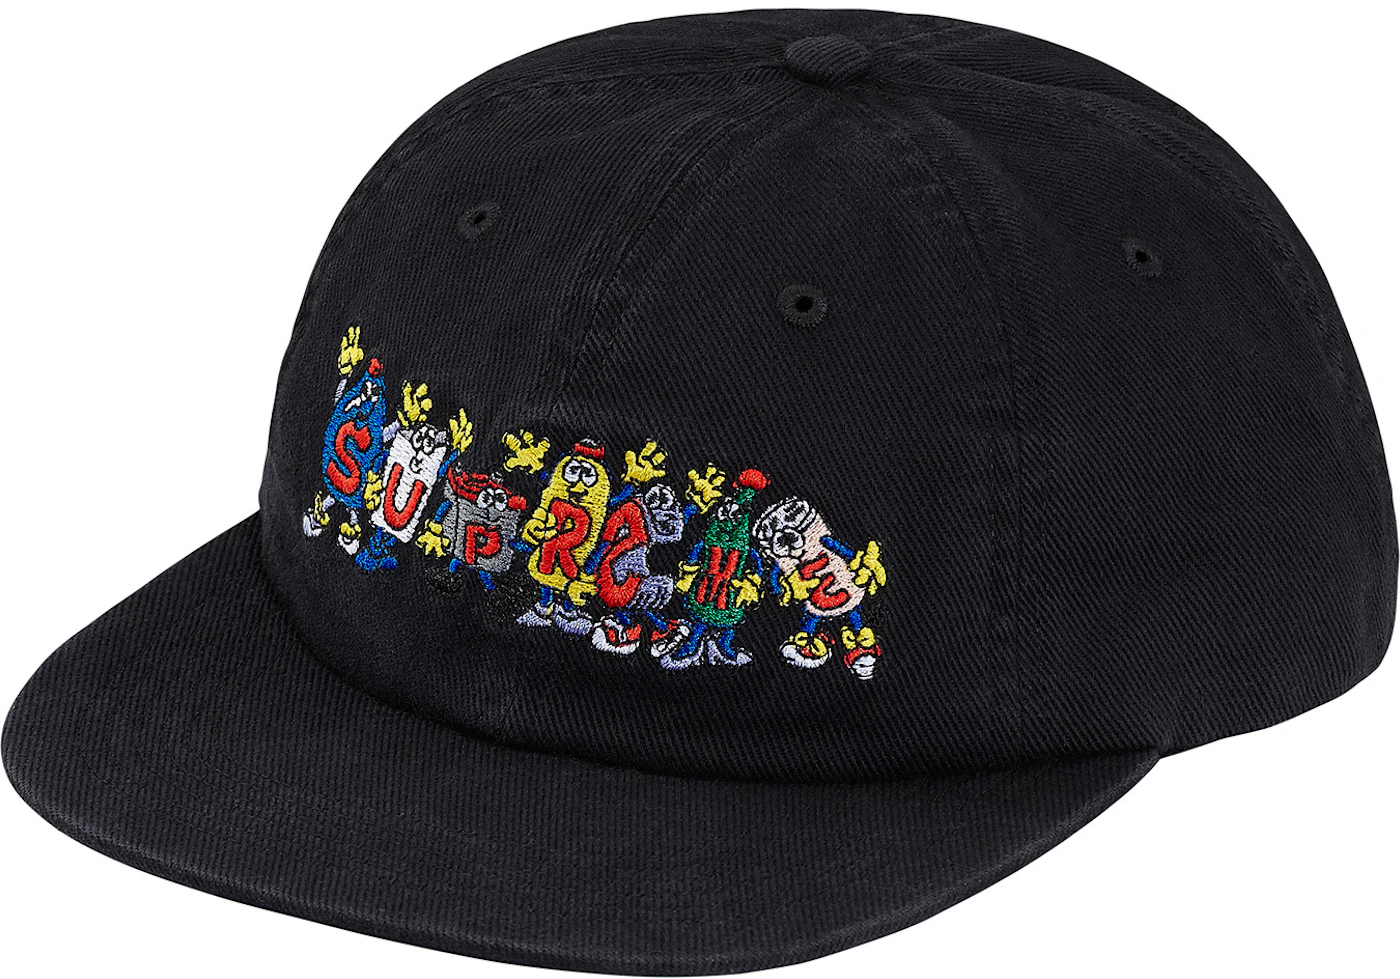 SUPREME FRIENDS & RECYCLE 6-panel for Sale in Cleveland